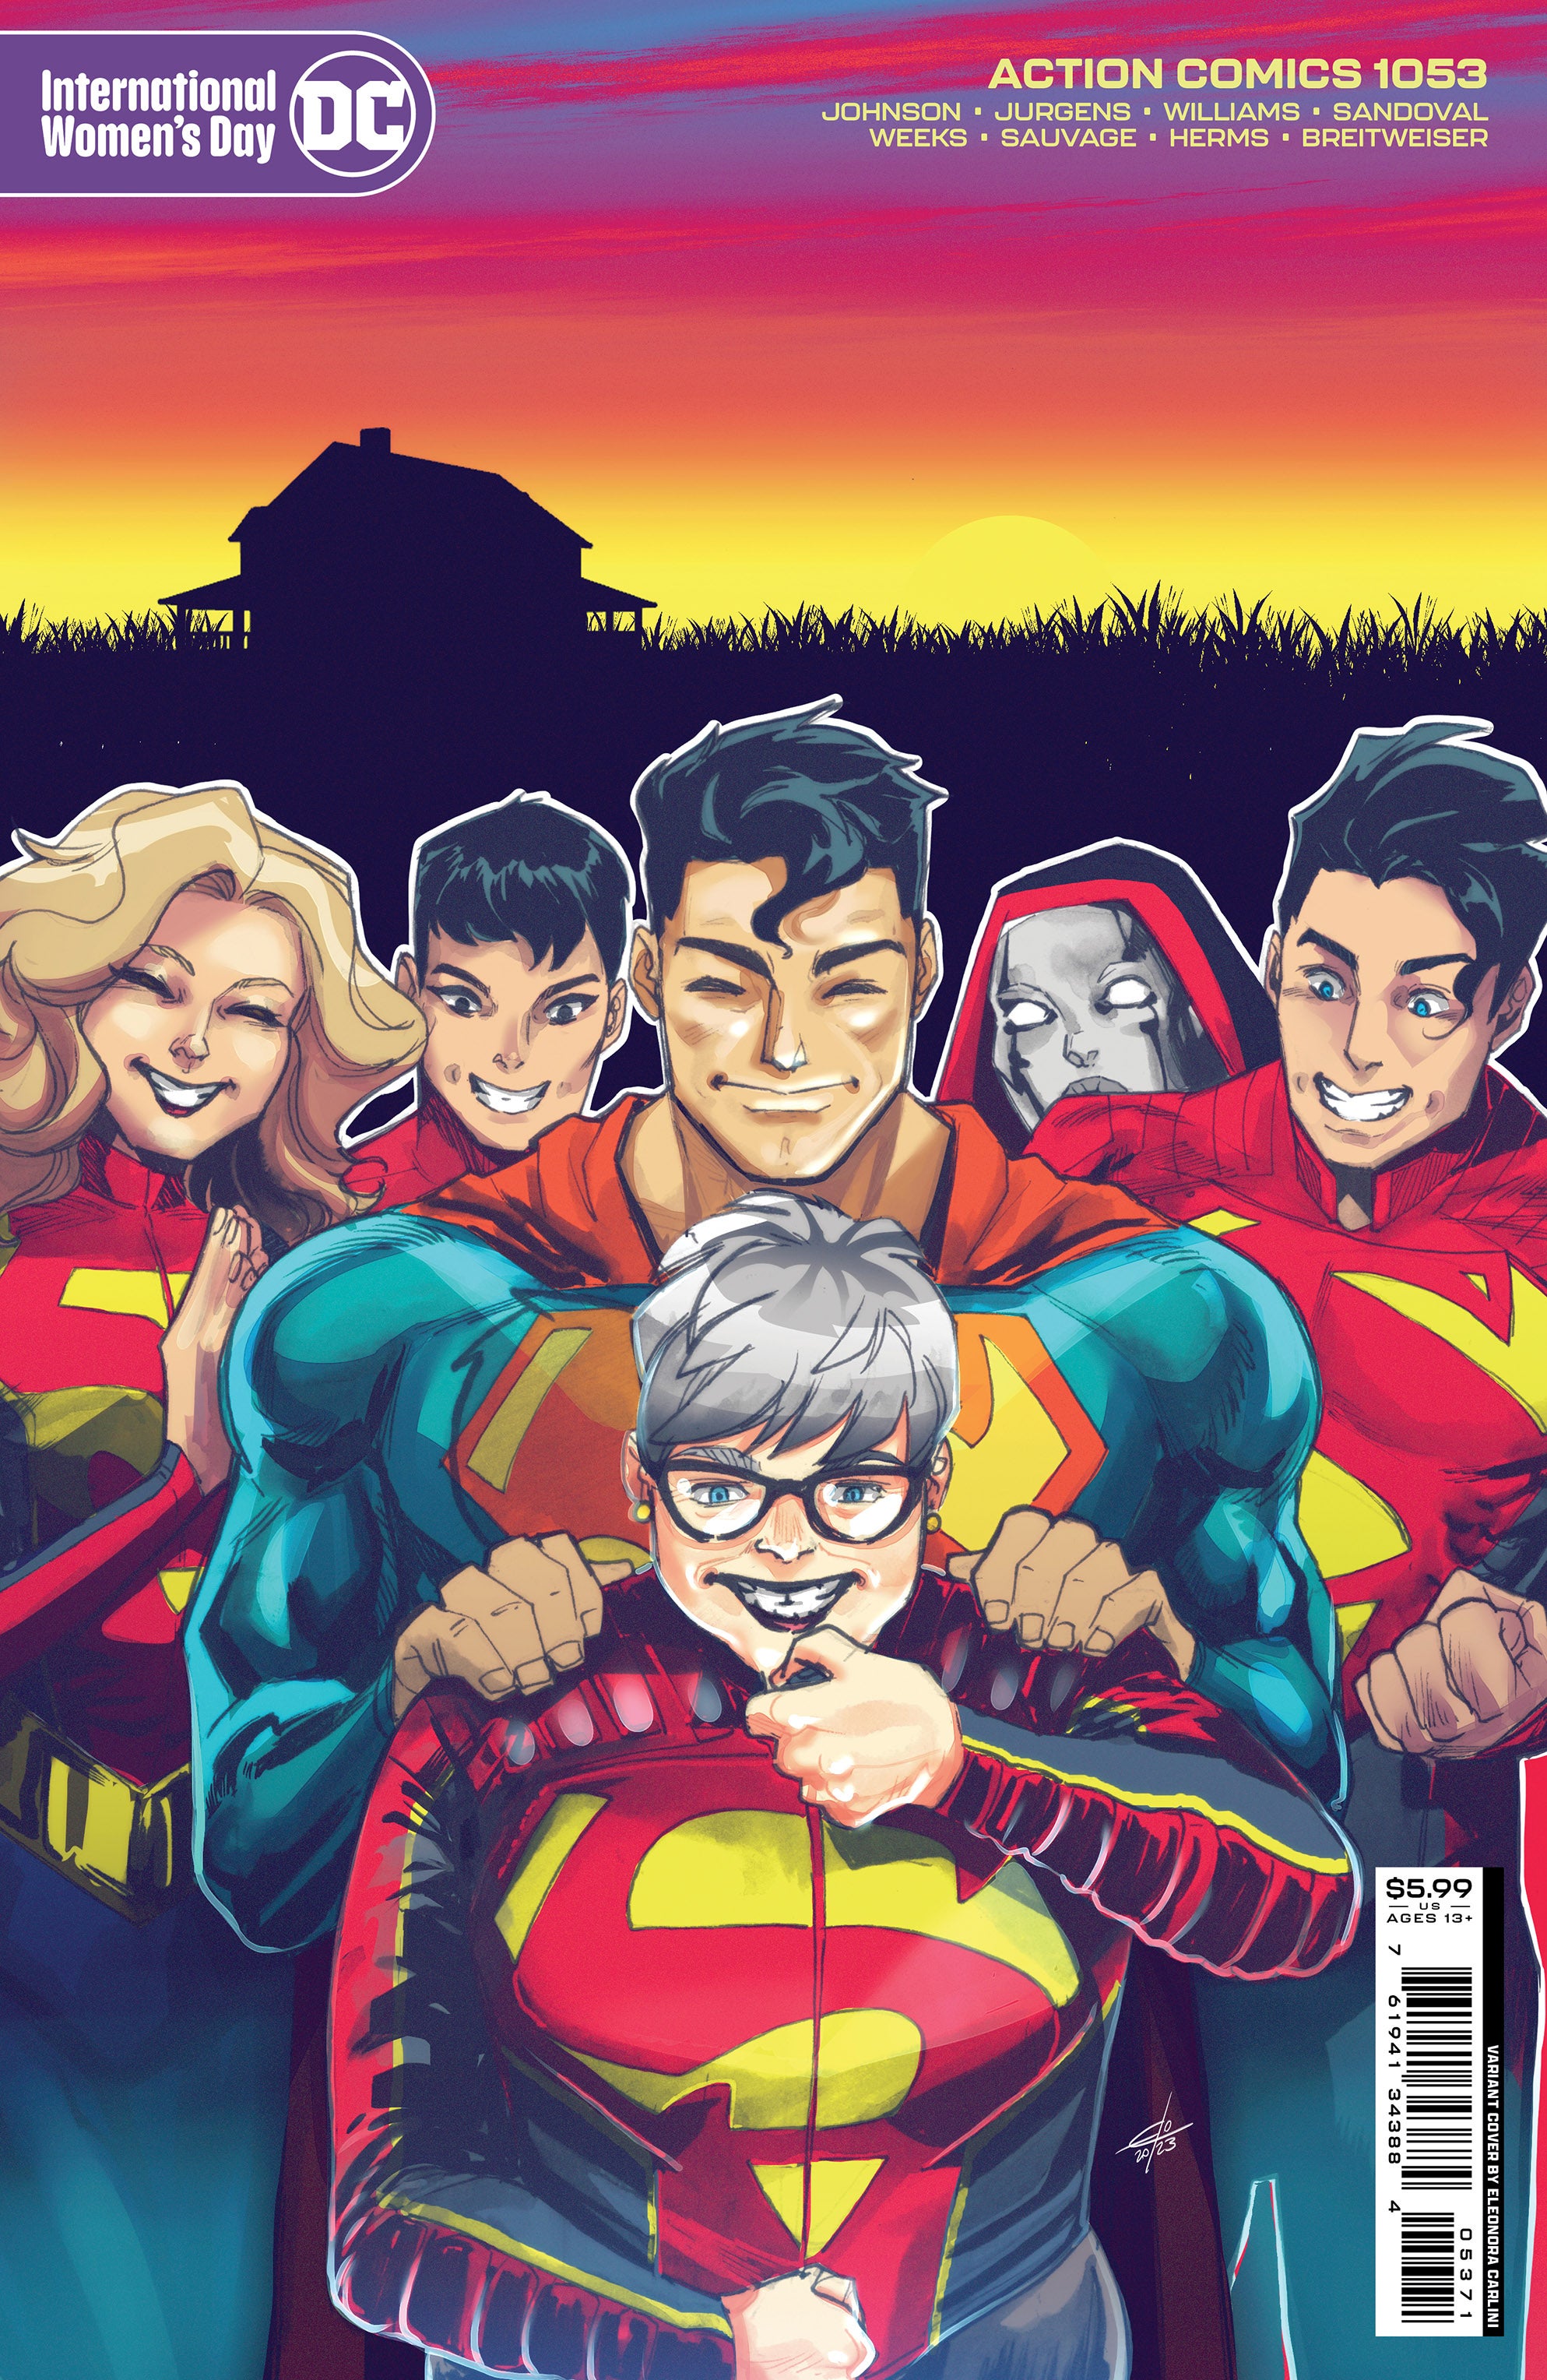 Illustration featuring Super family